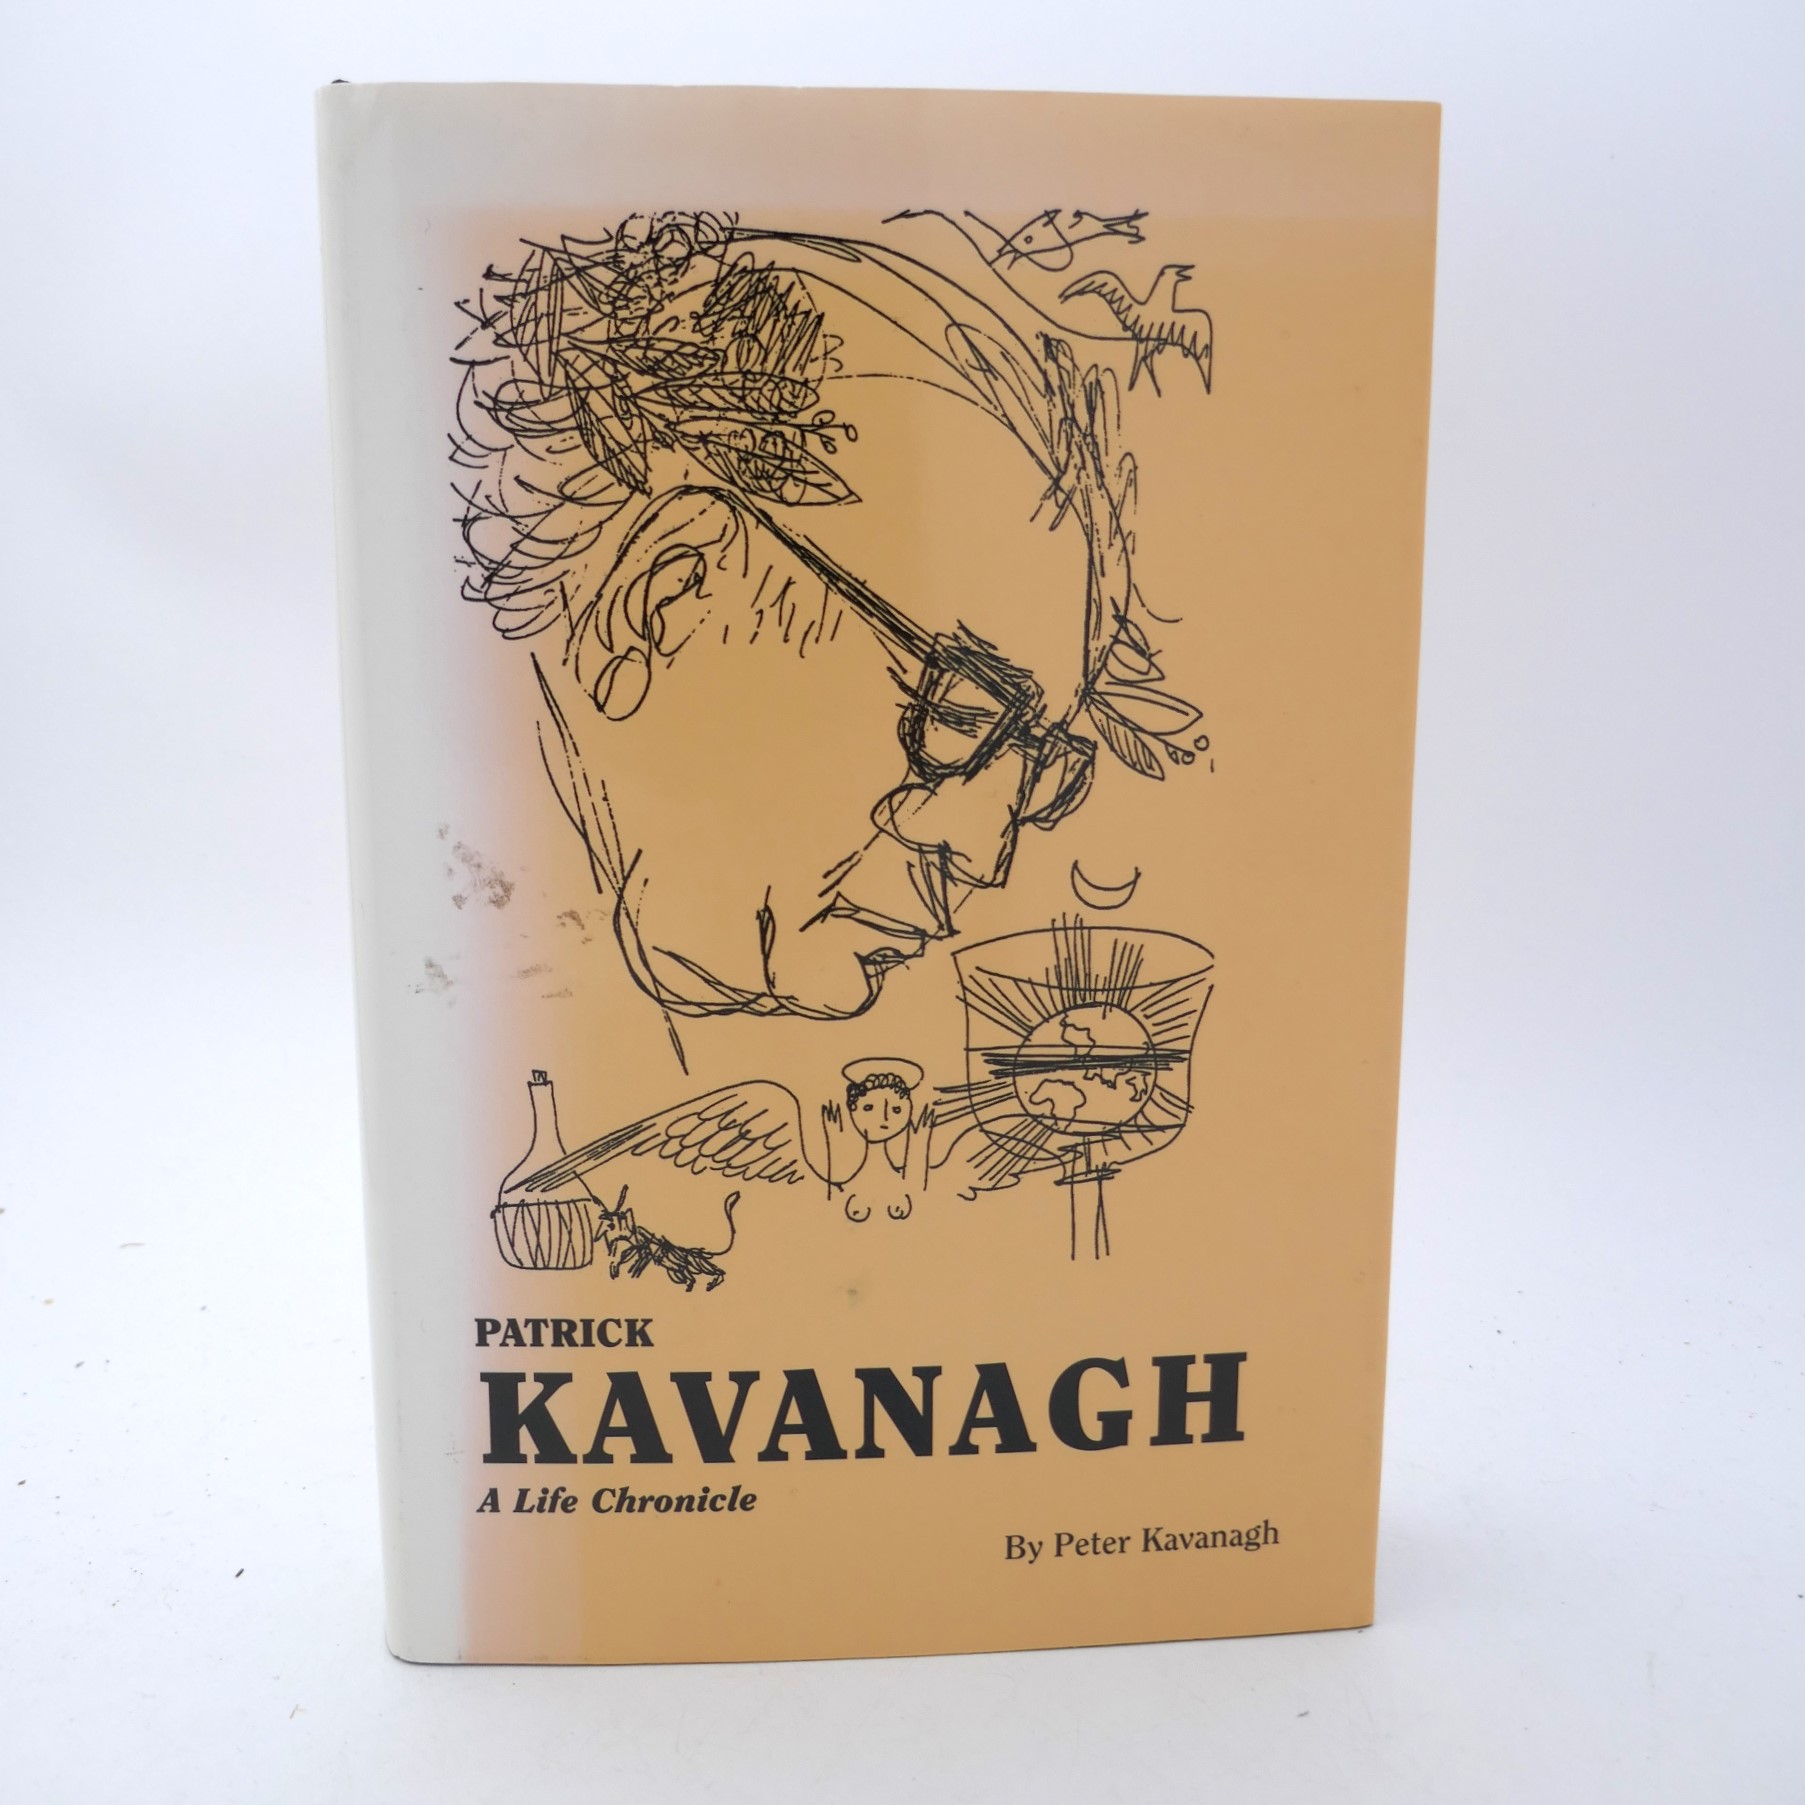 Patrick Kavanagh. A Life Chronicle. Signed Copy (2000) - Ulysses Rare Books